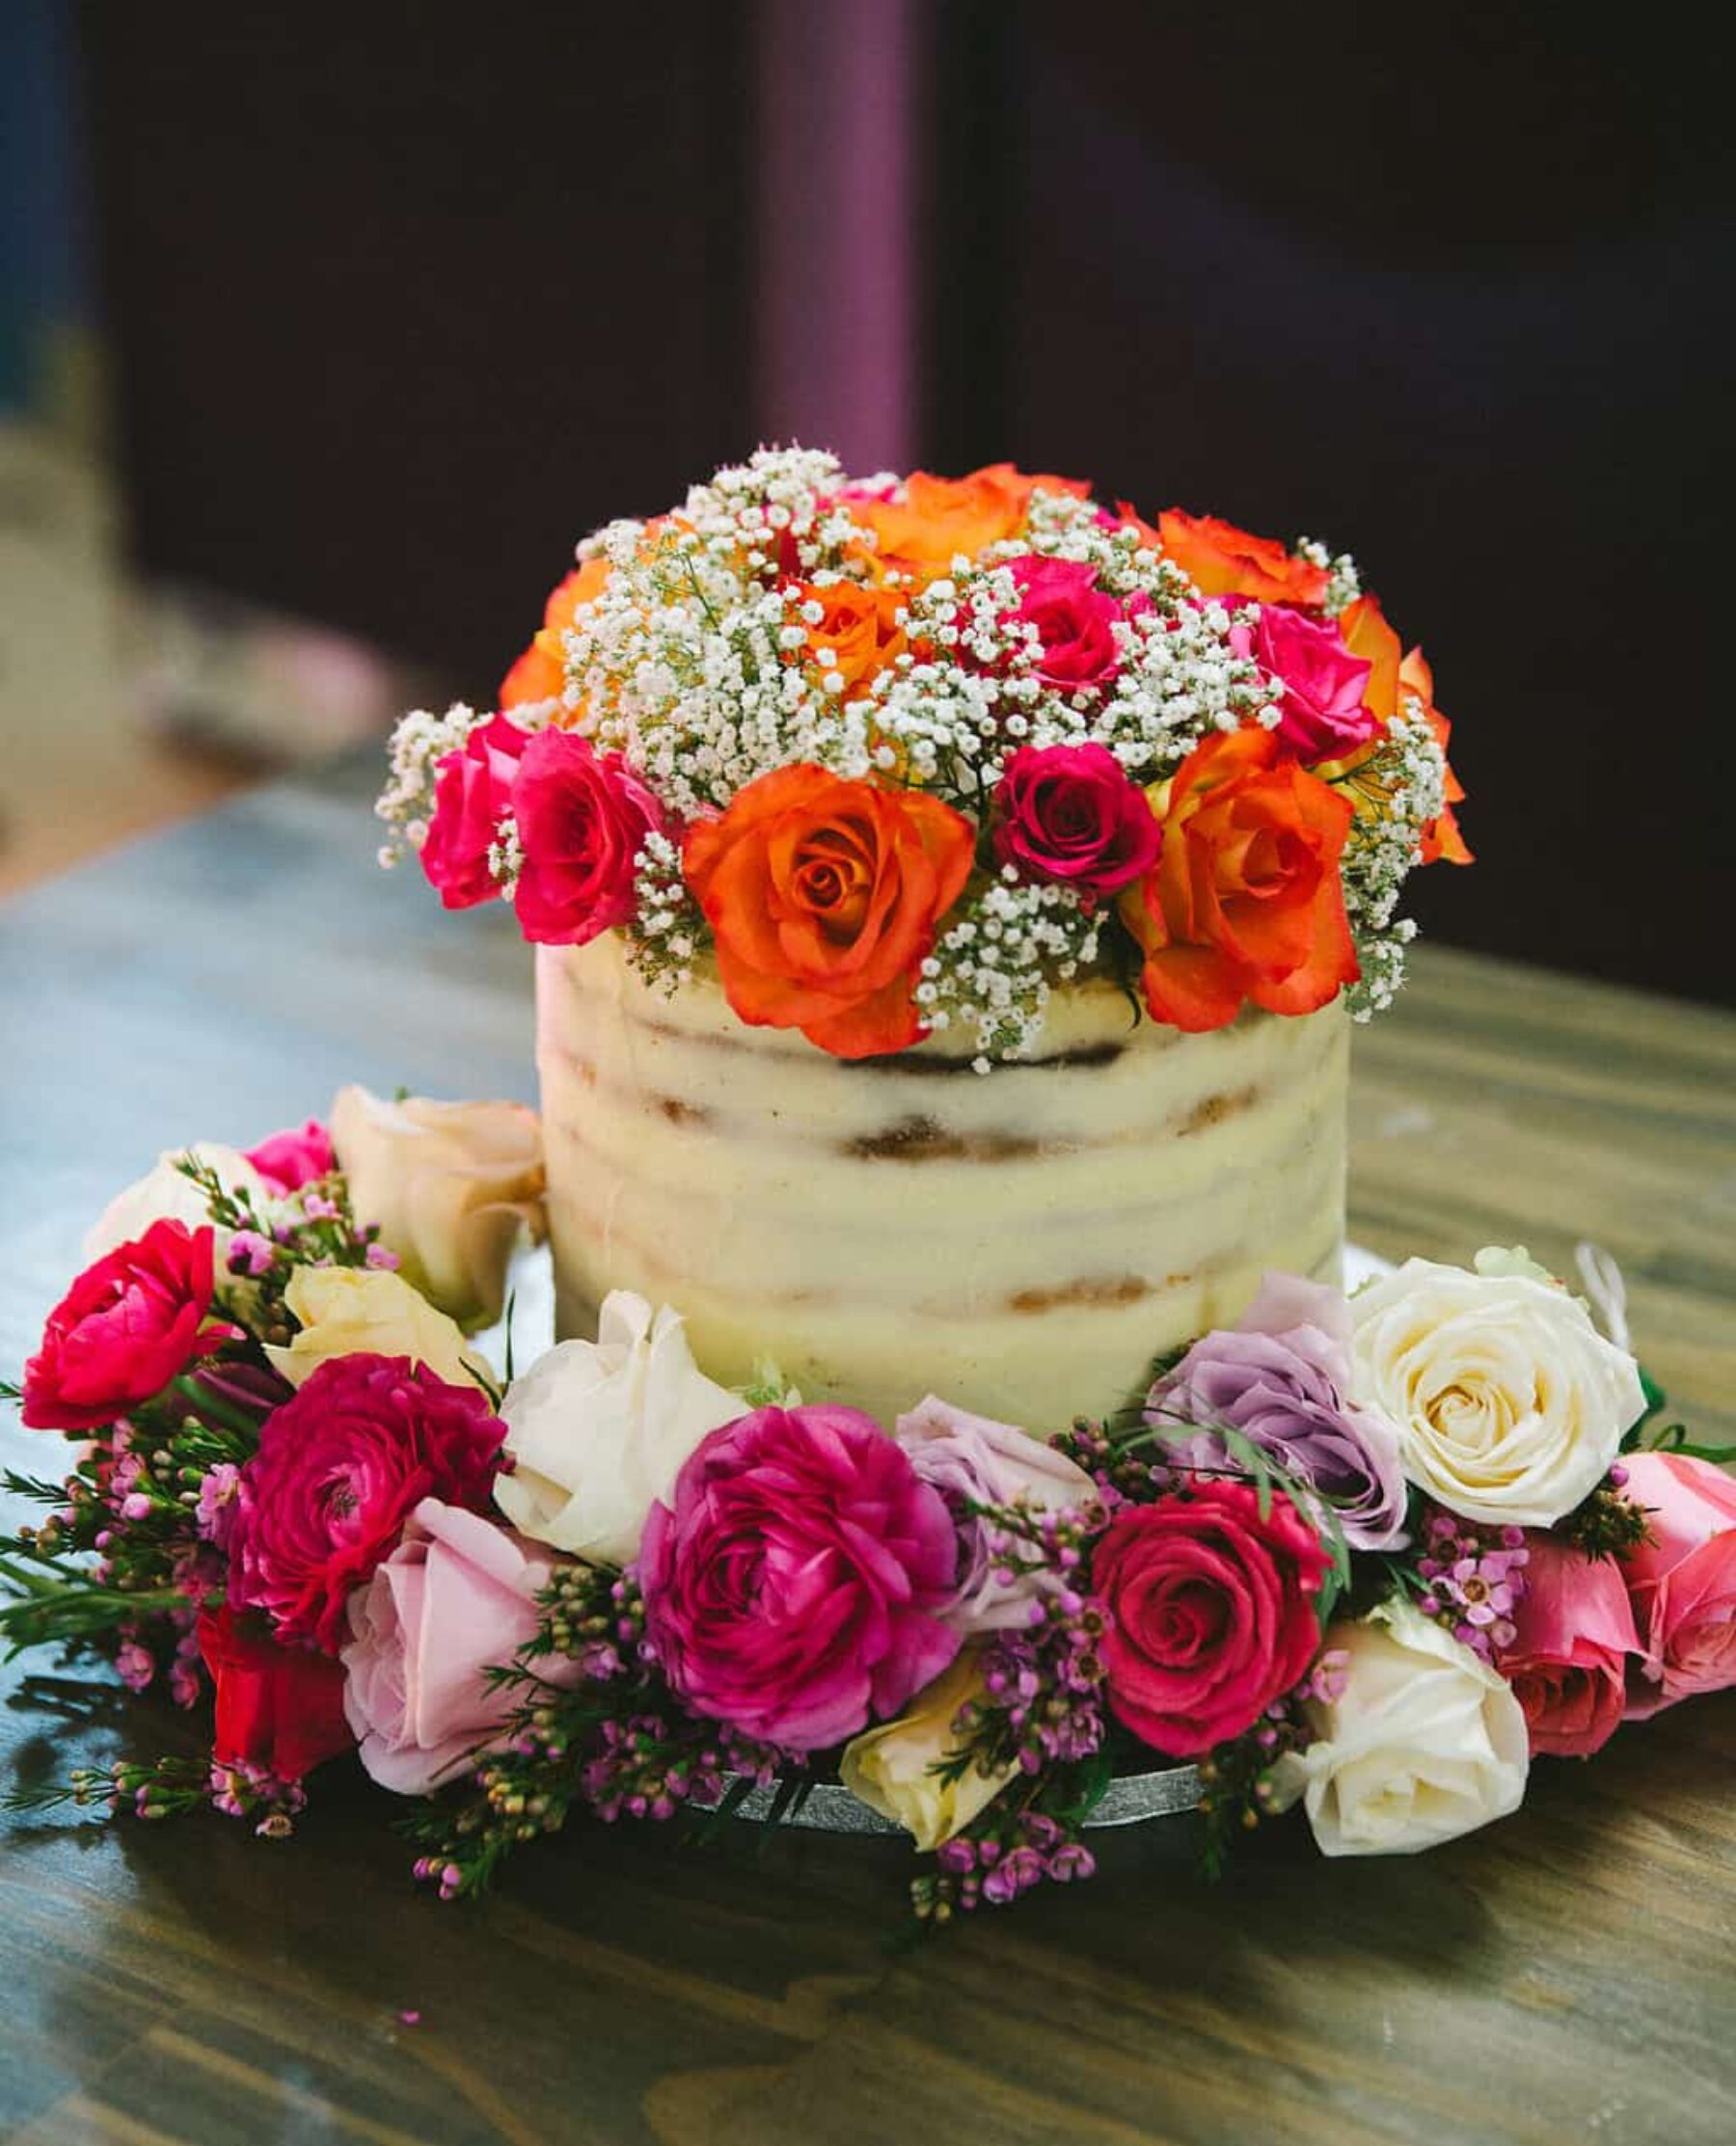 nearly-naked cake with fresh flowers